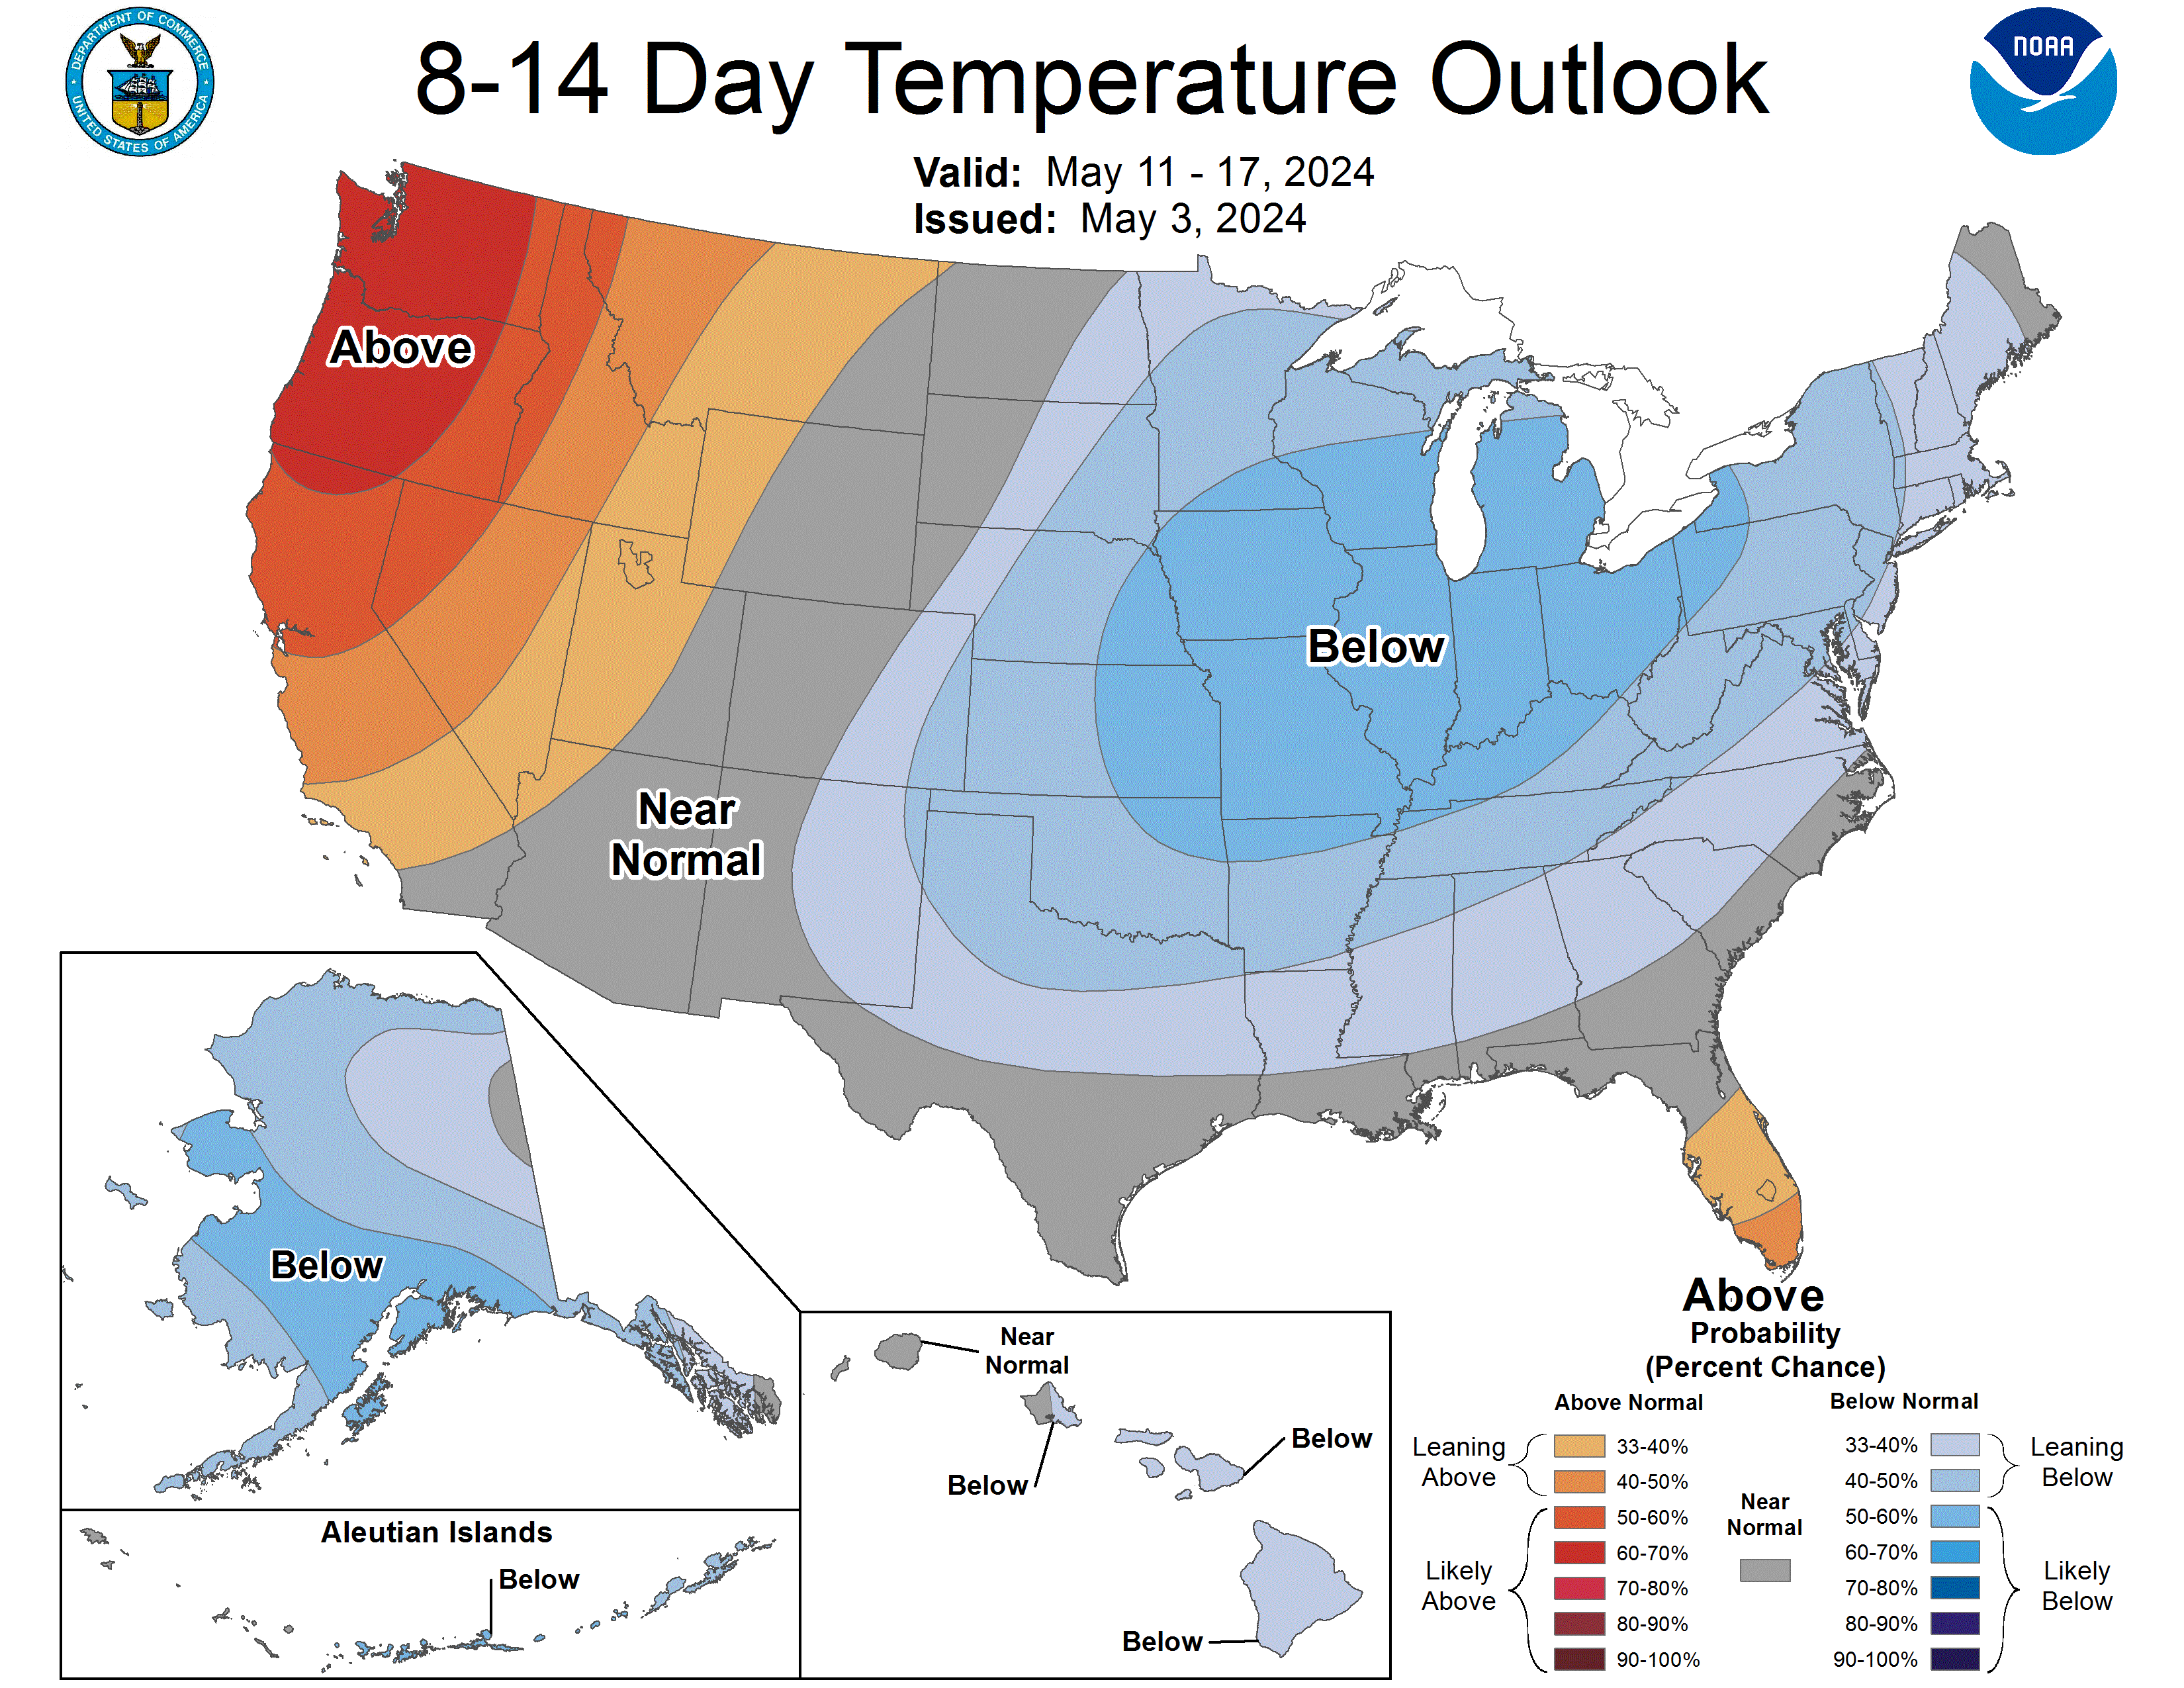 Rollercoaster ride of temperatures this week, but early-September looks warm